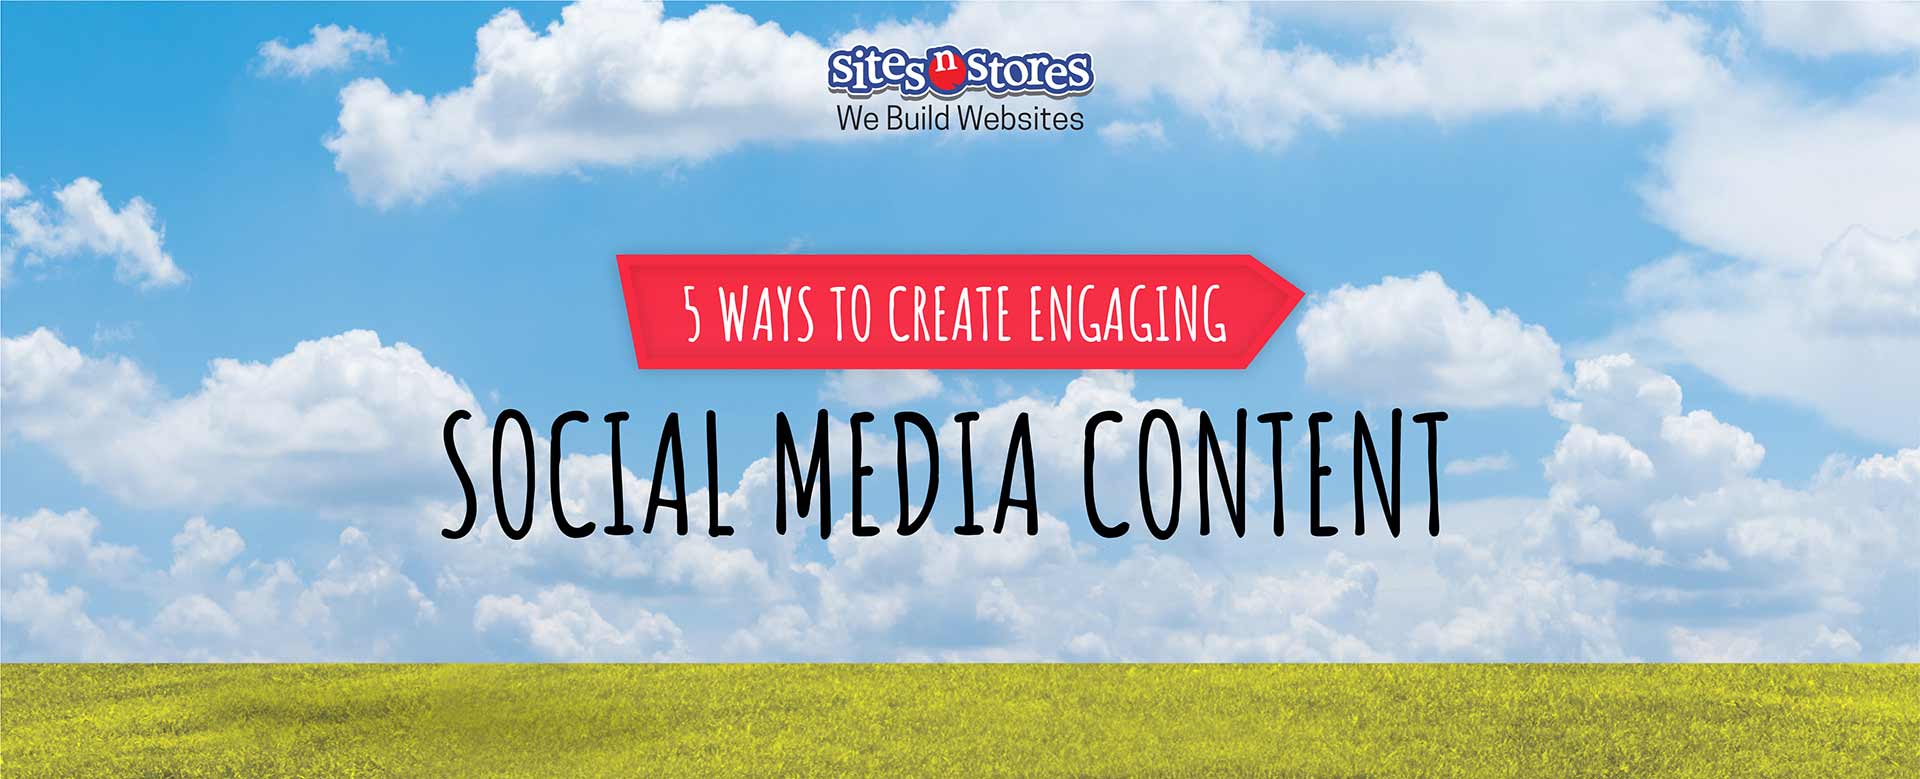 5 Ways to Create Engaging Social Media Content